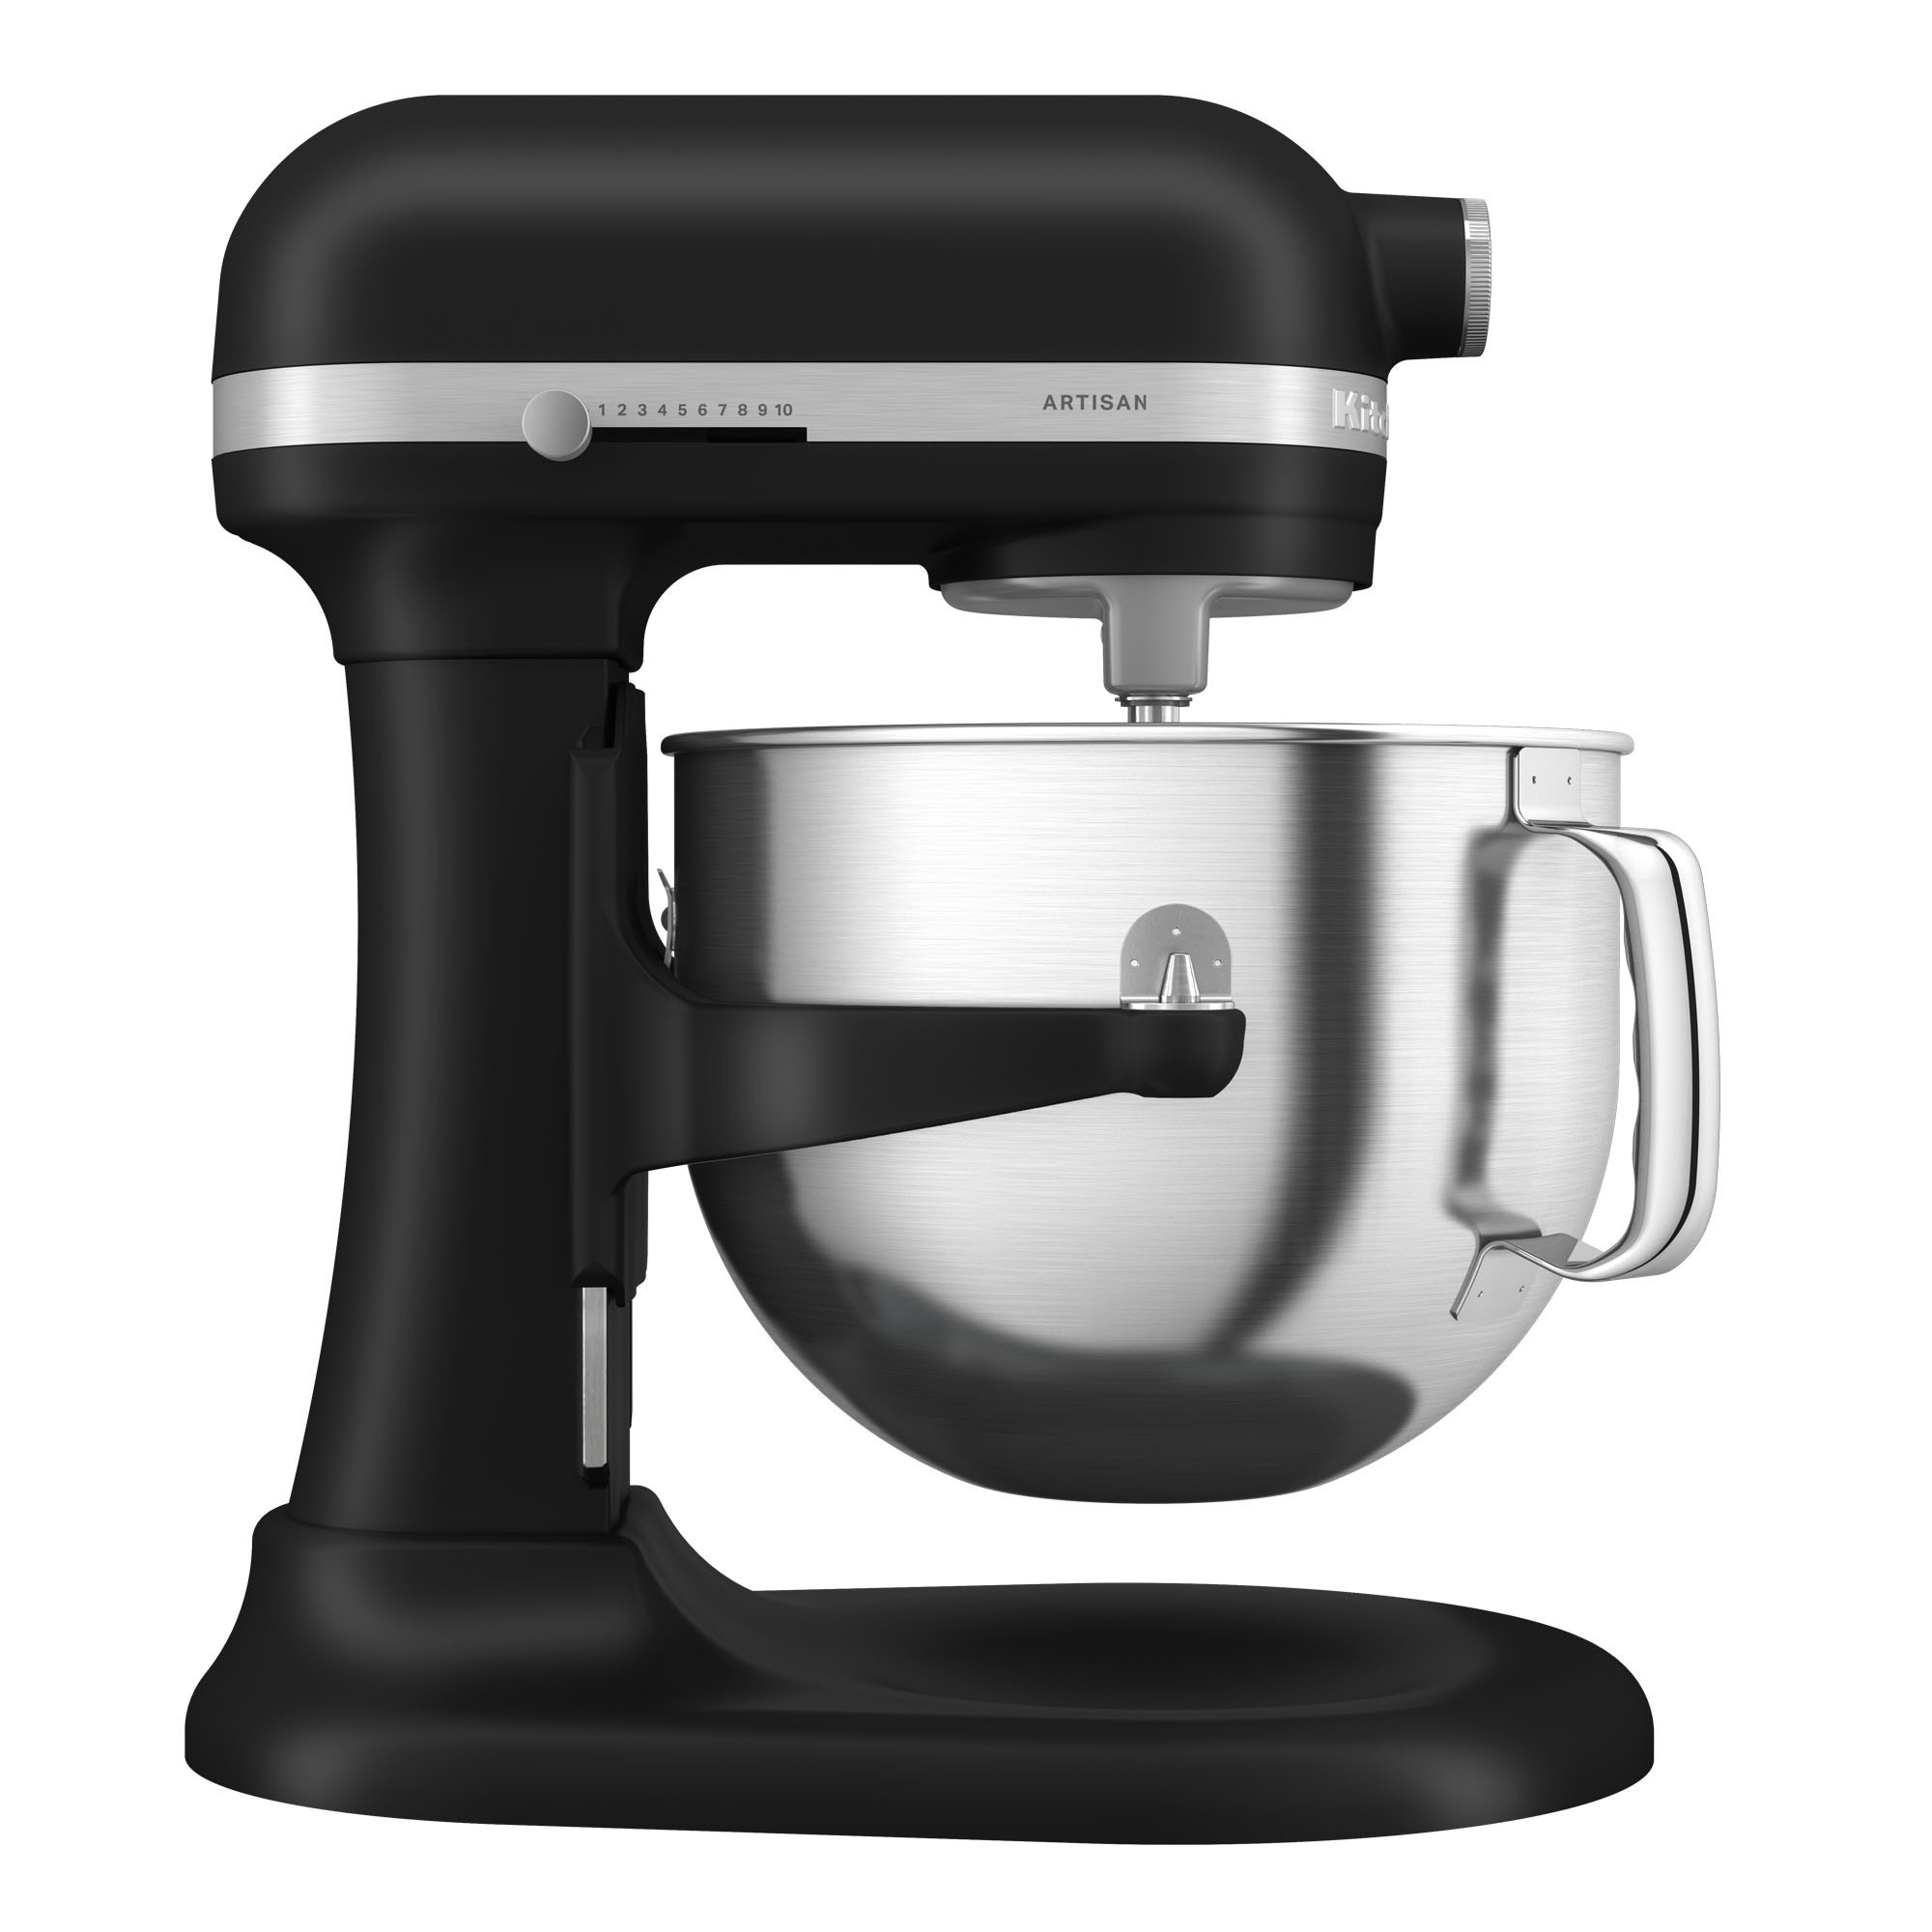 KitchenAid Professional bowl-lift stand mixer and pasta attachment review